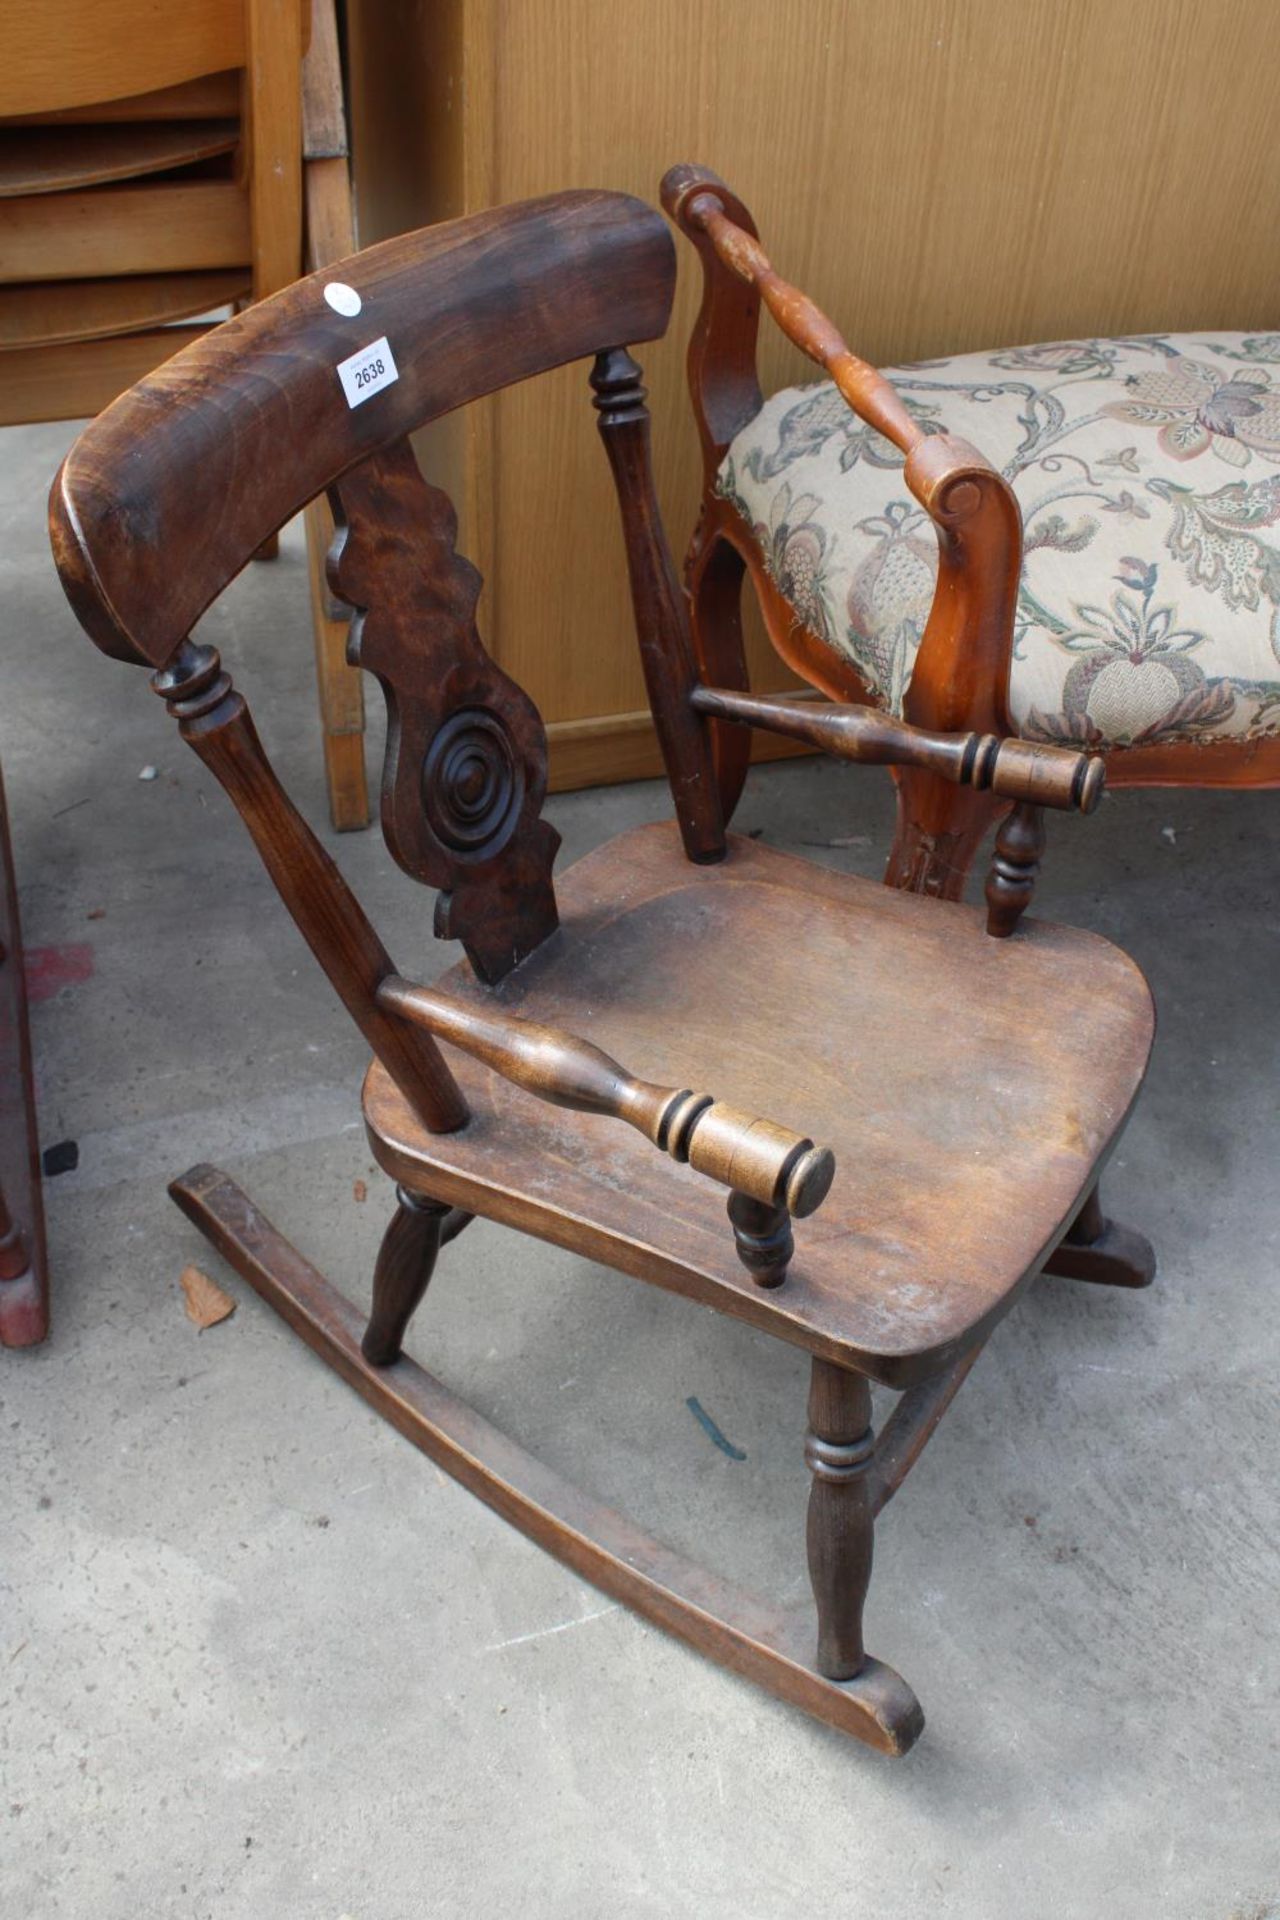 A VICTORIAN STYLE BEECH CHILDS ROCKING CHAIR WITH BULLSEYE BACK